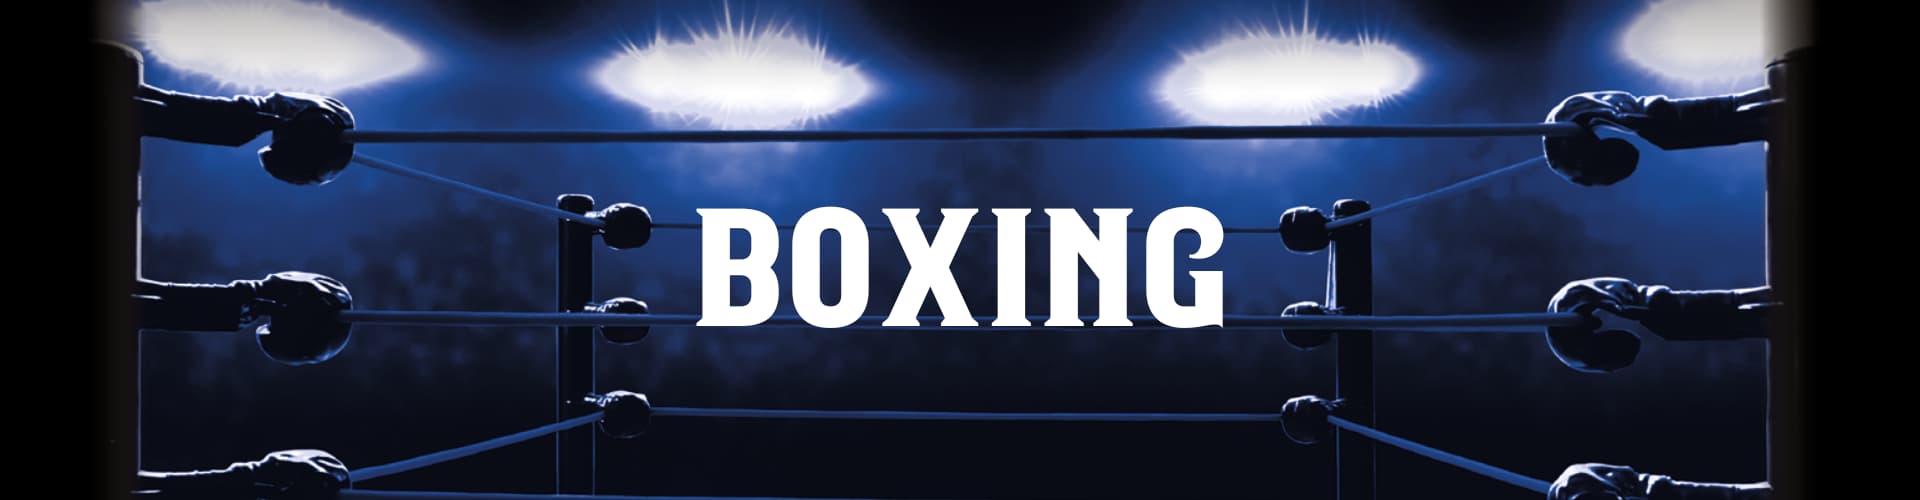 Watch Live Boxing in Grantham at The Old Bank Pub